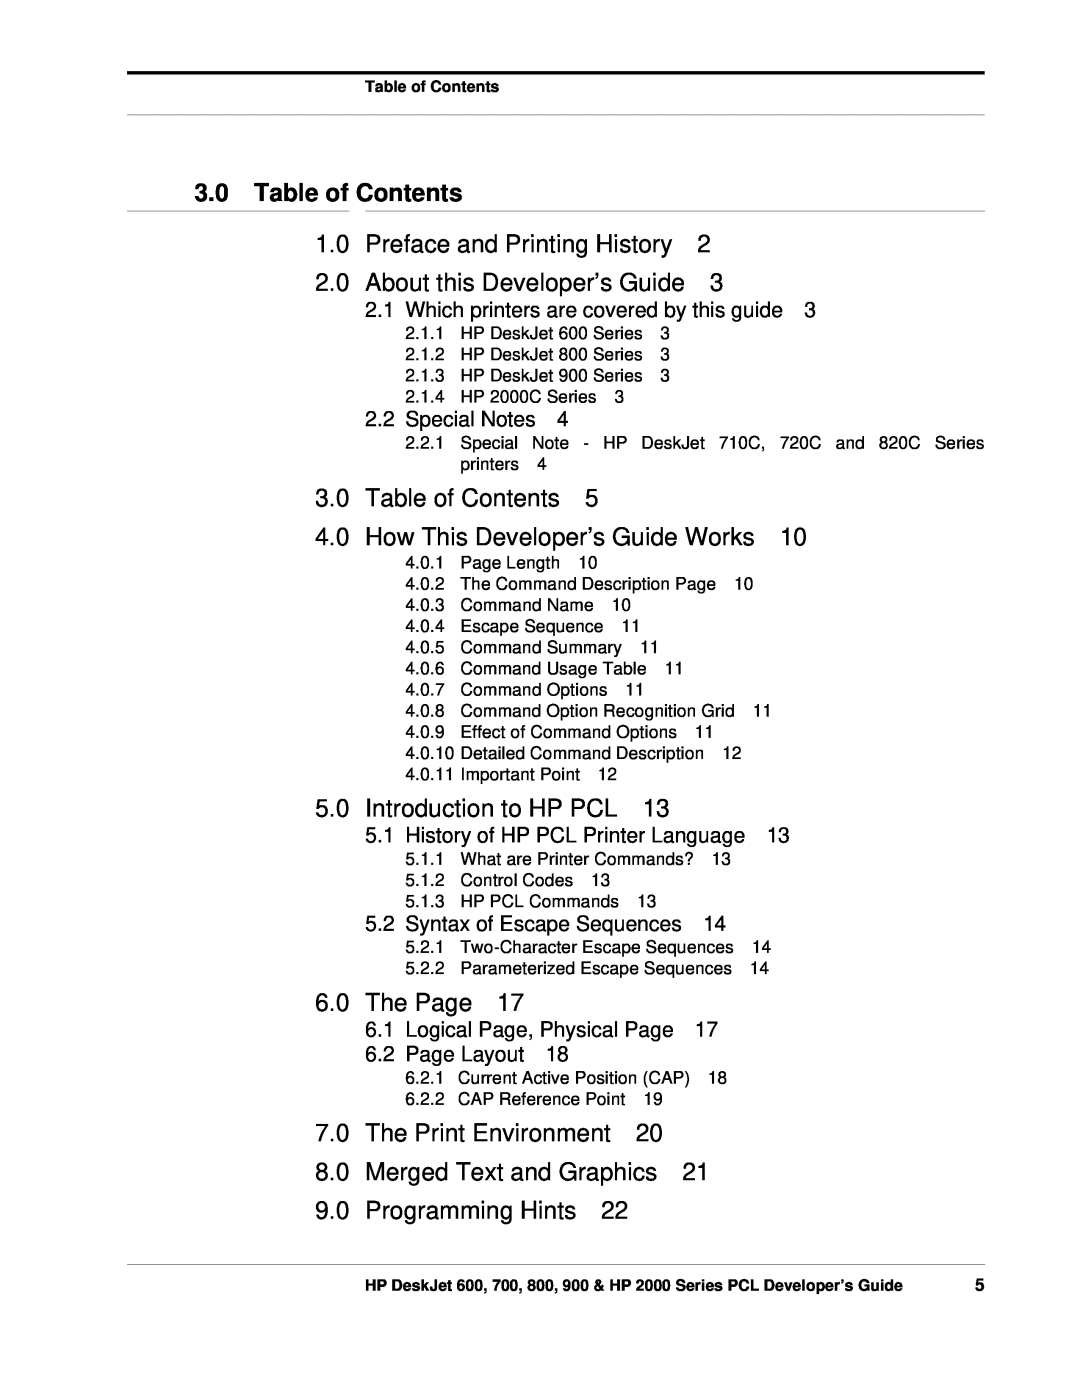 HP 700 Table of Contents, Preface and Printing History, How This Developer’s Guide Works, Introduction to HP PCL, The Page 